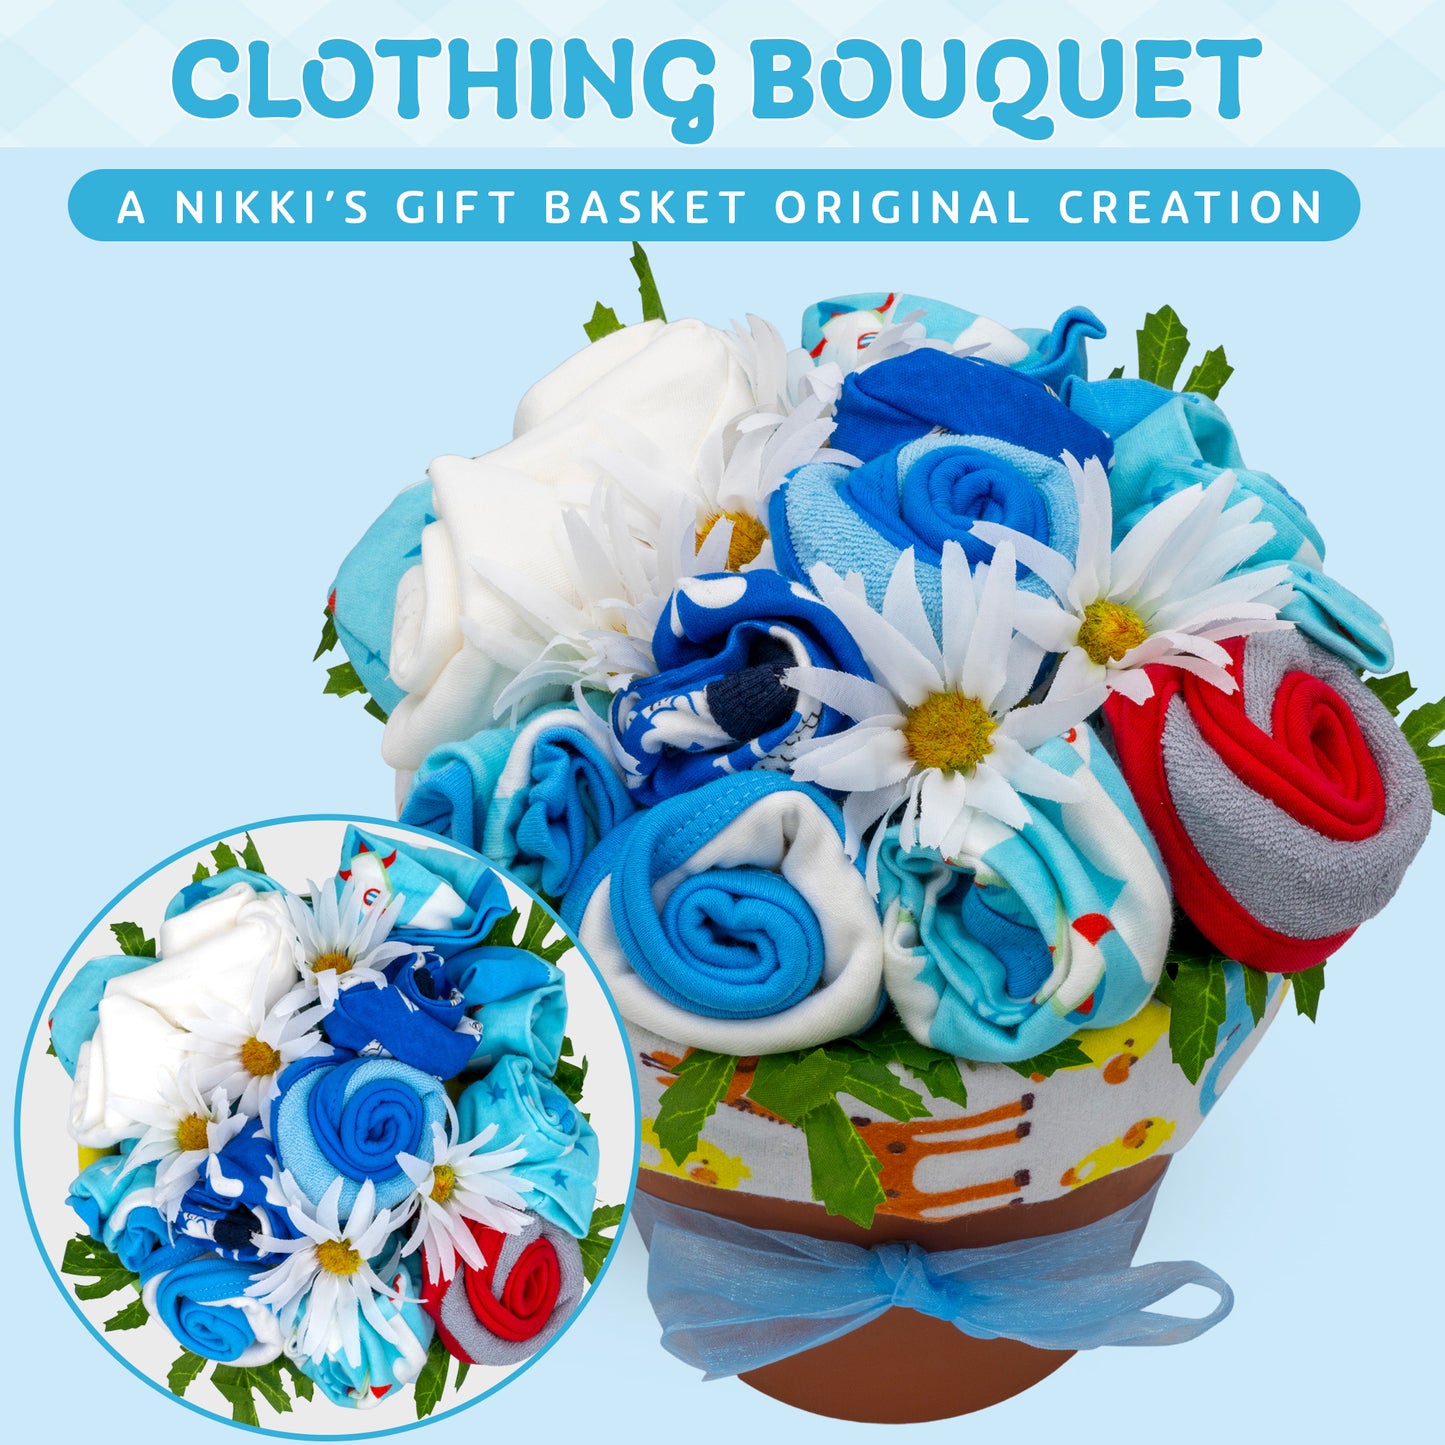 Baby Clothing Flower Bouquet, New Baby Boy Gift Basket with Baby Clothing Arranged Like Celebration Flowers, Creative Unique Baby Gift for New Parents